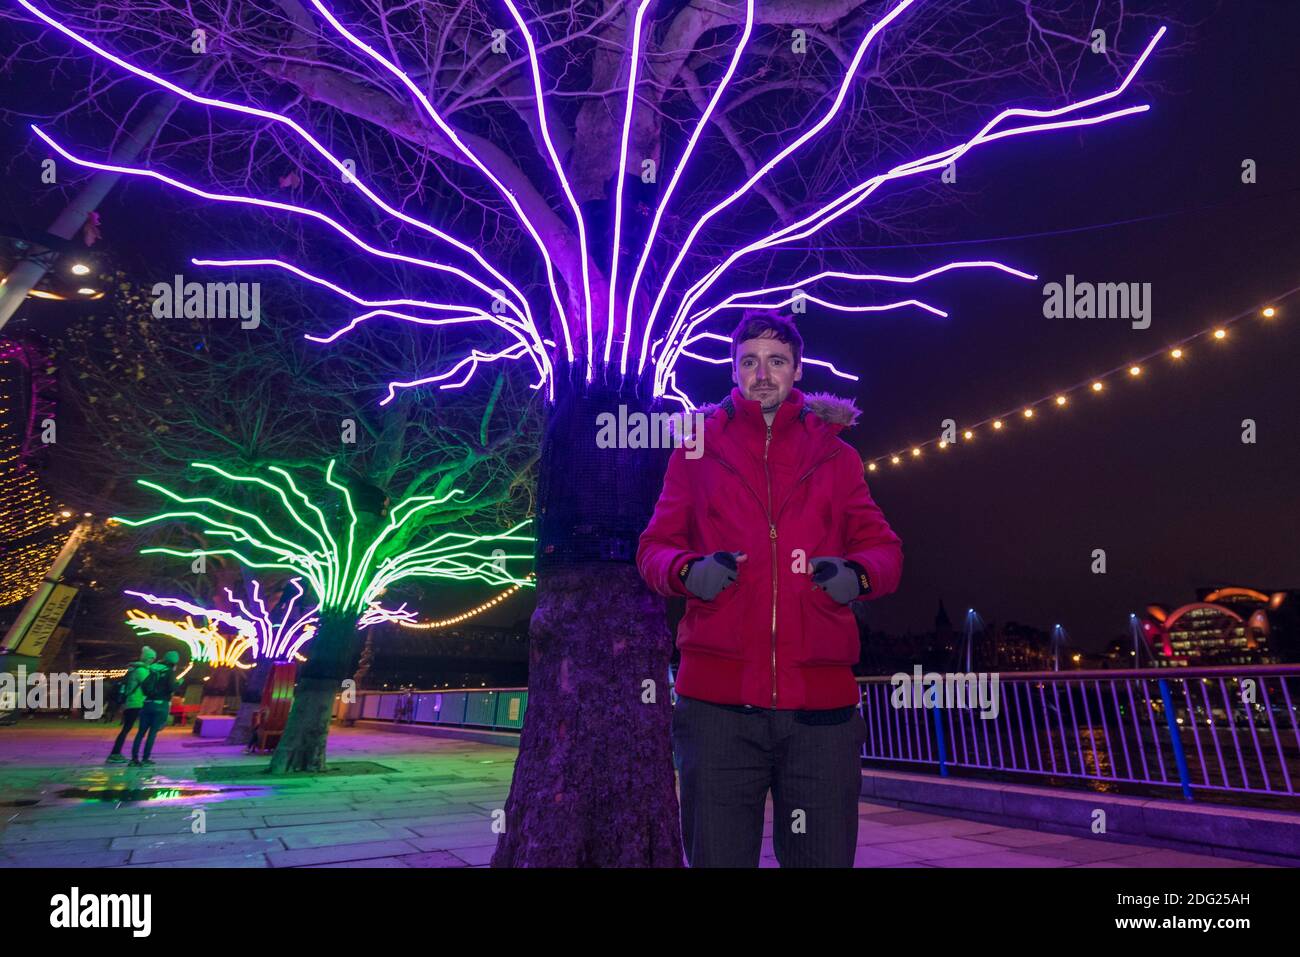 London, UK.  7 December 2020. Artist David Ogle in front of his work "Lumen", trees illuminated with glowing neon flex. Preview of “Winter Light” presented by Southbank Centre.  Over 15 artworks and new illuminated commissions by a range of leading international artists are on display around the site’s buildings and the Riverside Walk until the end of February 2021. Credit: Stephen Chung / Alamy Live News Stock Photo